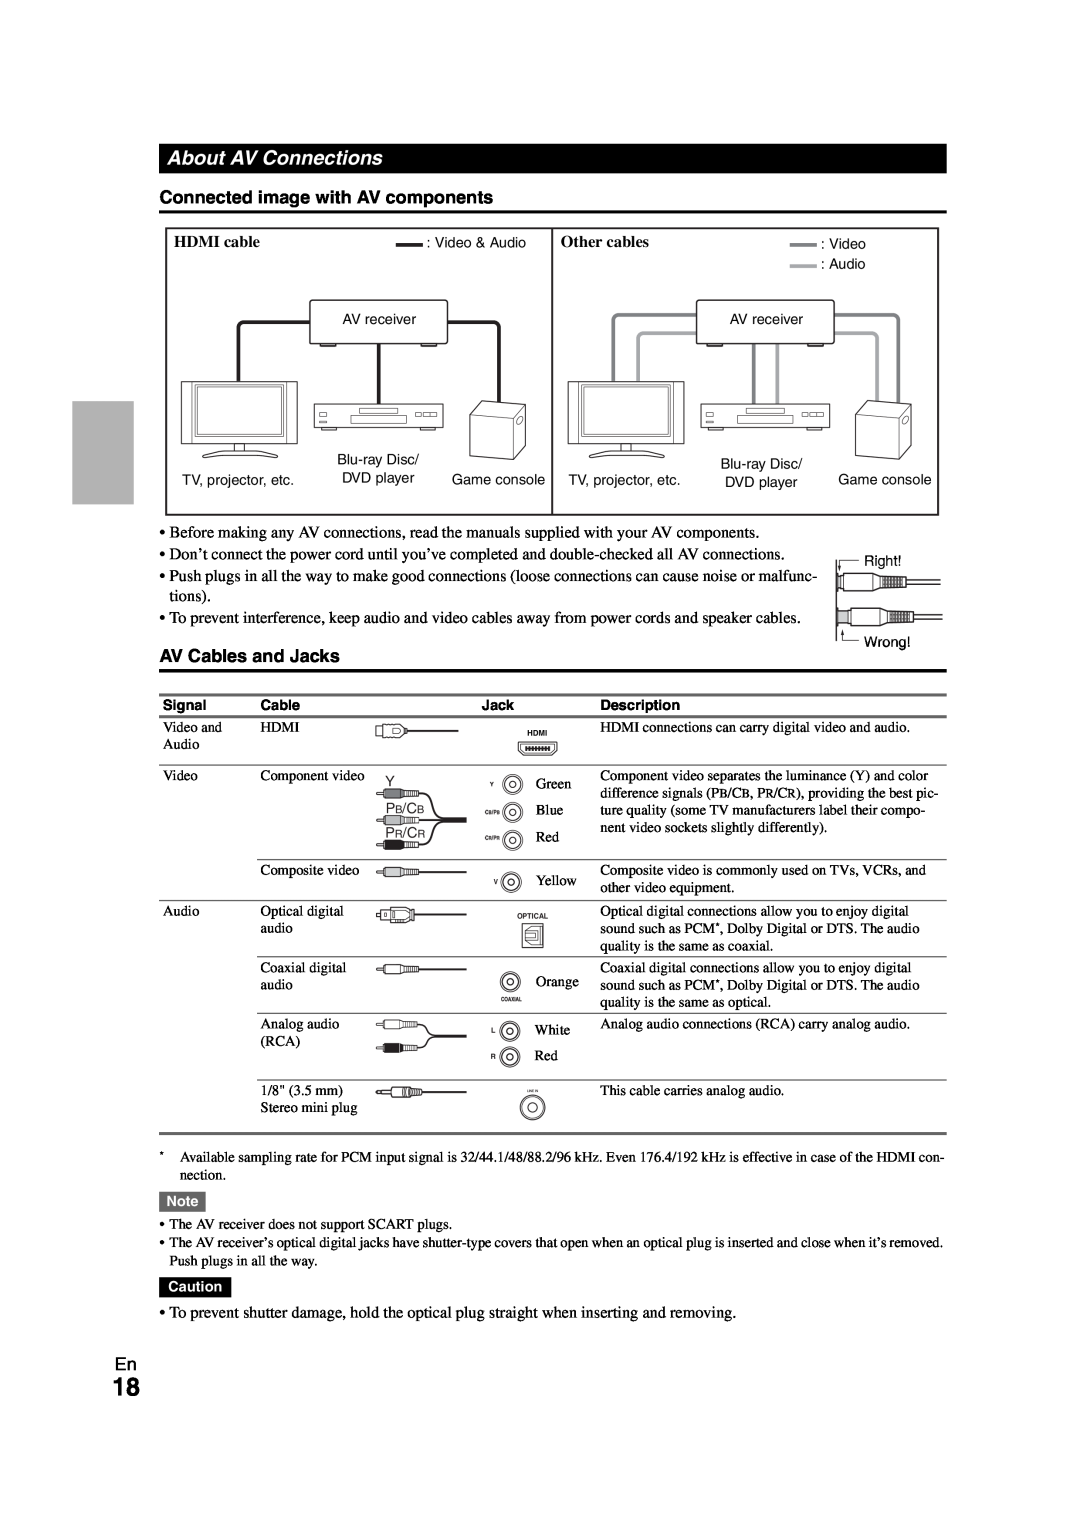 Onkyo HT-S7300 instruction manual About AV Connections, Connected image with AV components, AV Cables and Jacks 